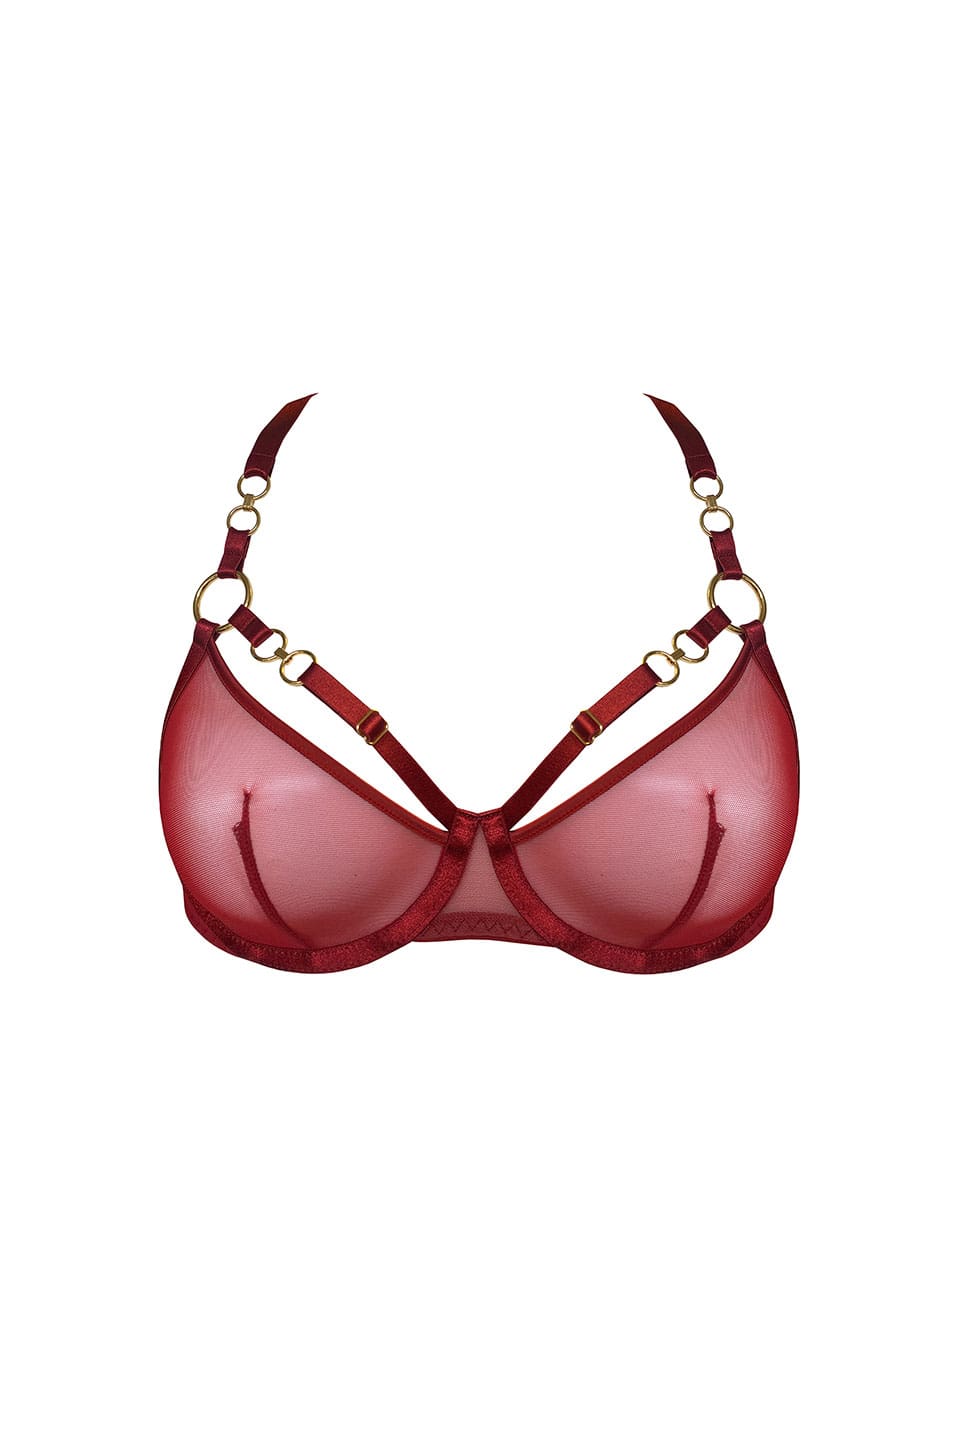 Thumbnail for Product gallery 1, Kleio Balconette Wire Bra Burnt Red